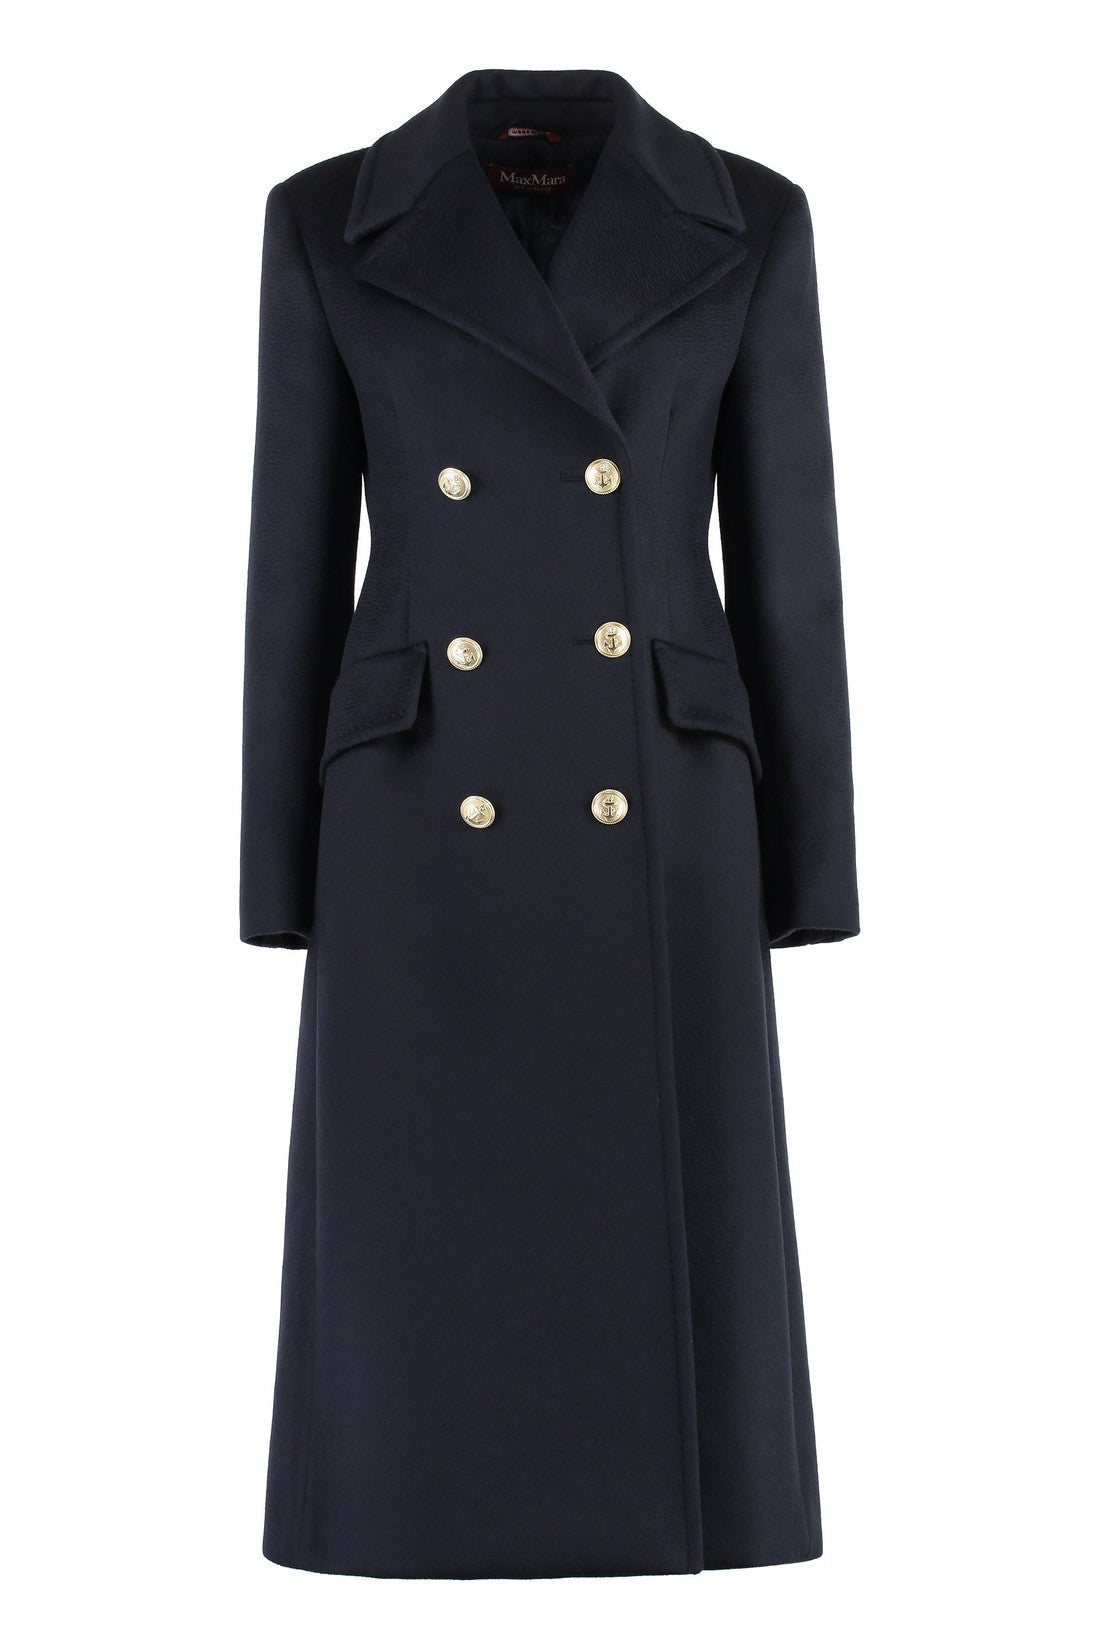 Max Mara Studio-OUTLET-SALE-Carabo double-breasted wool coat-ARCHIVIST